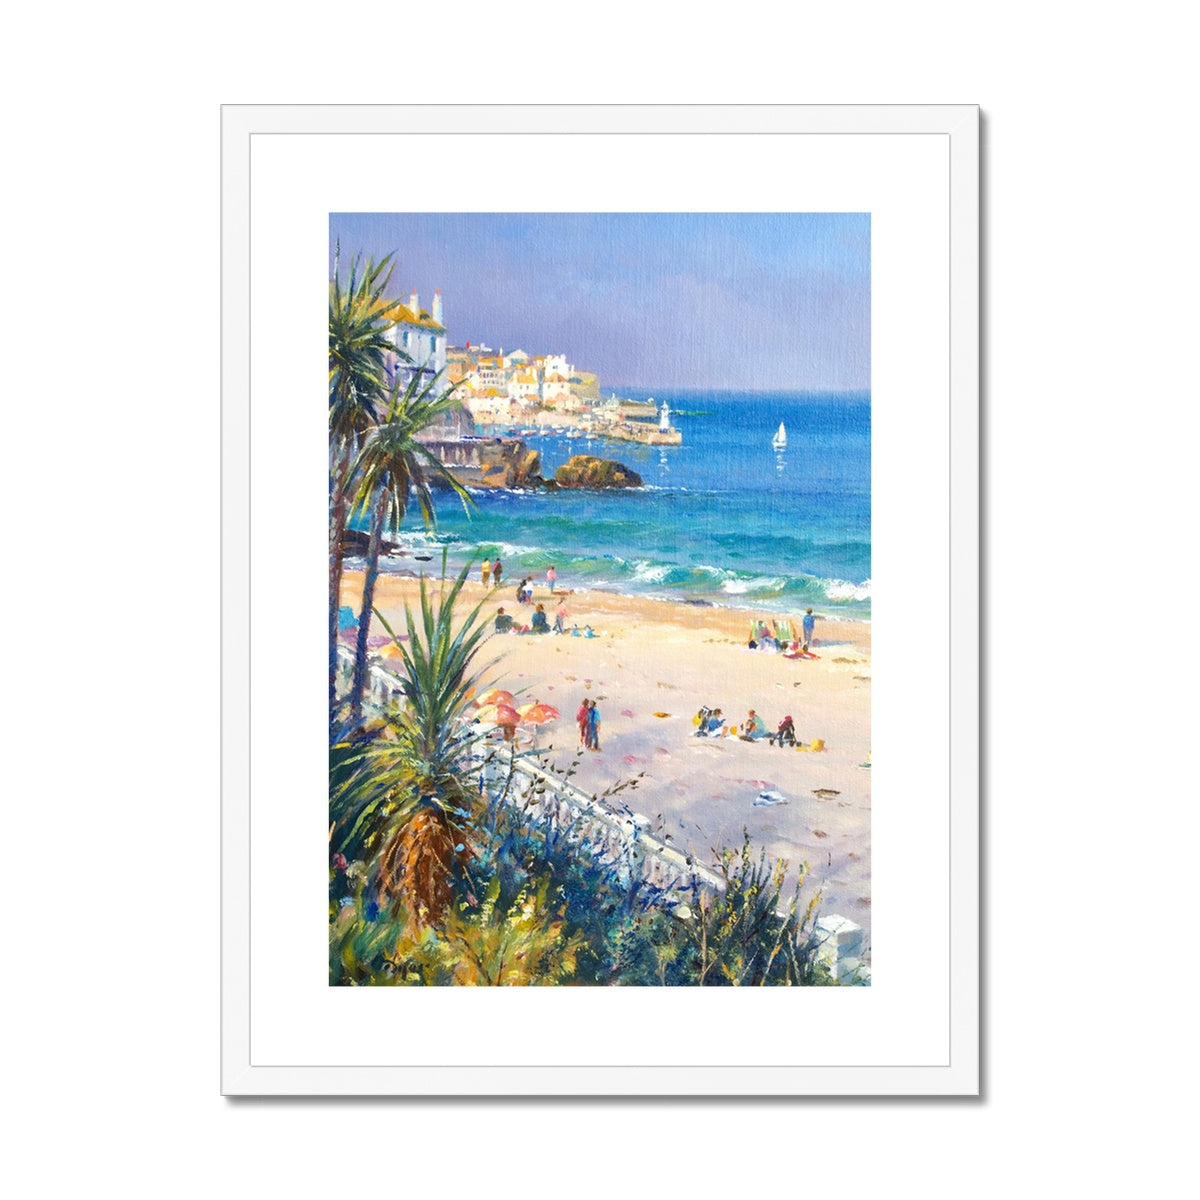  Ted Dyer Framed Open Edition Cornish Fine Art Print. 'Afternoon on the Beach. St Ives'. Cornwall Art Gallery